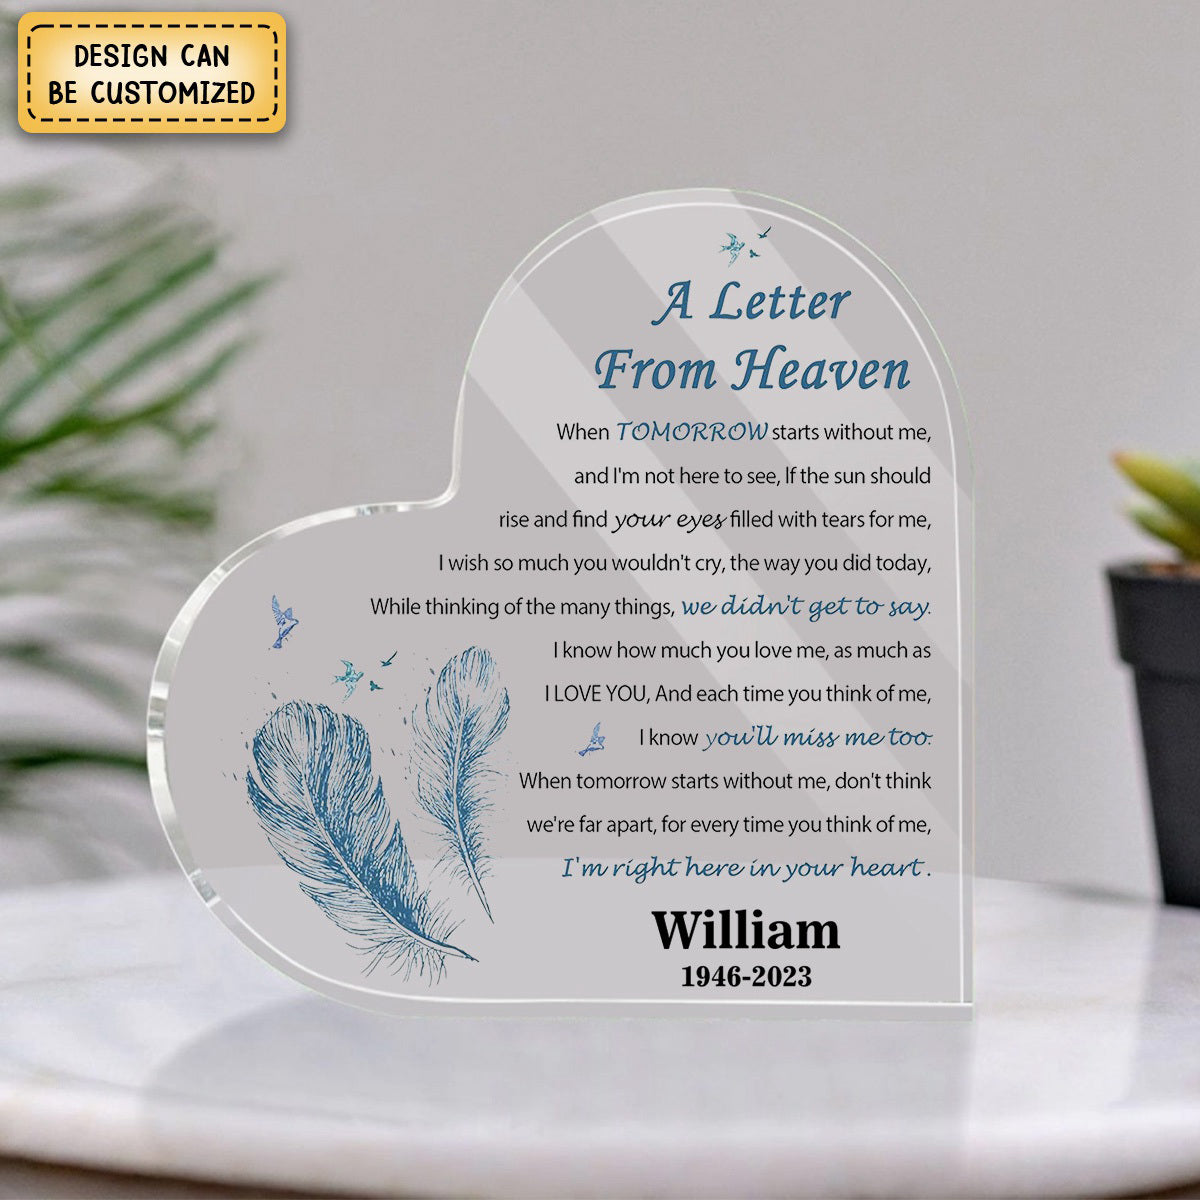 A Letter from Heaven - Personalized Heart Acrylic Plaque - Memorial Gift